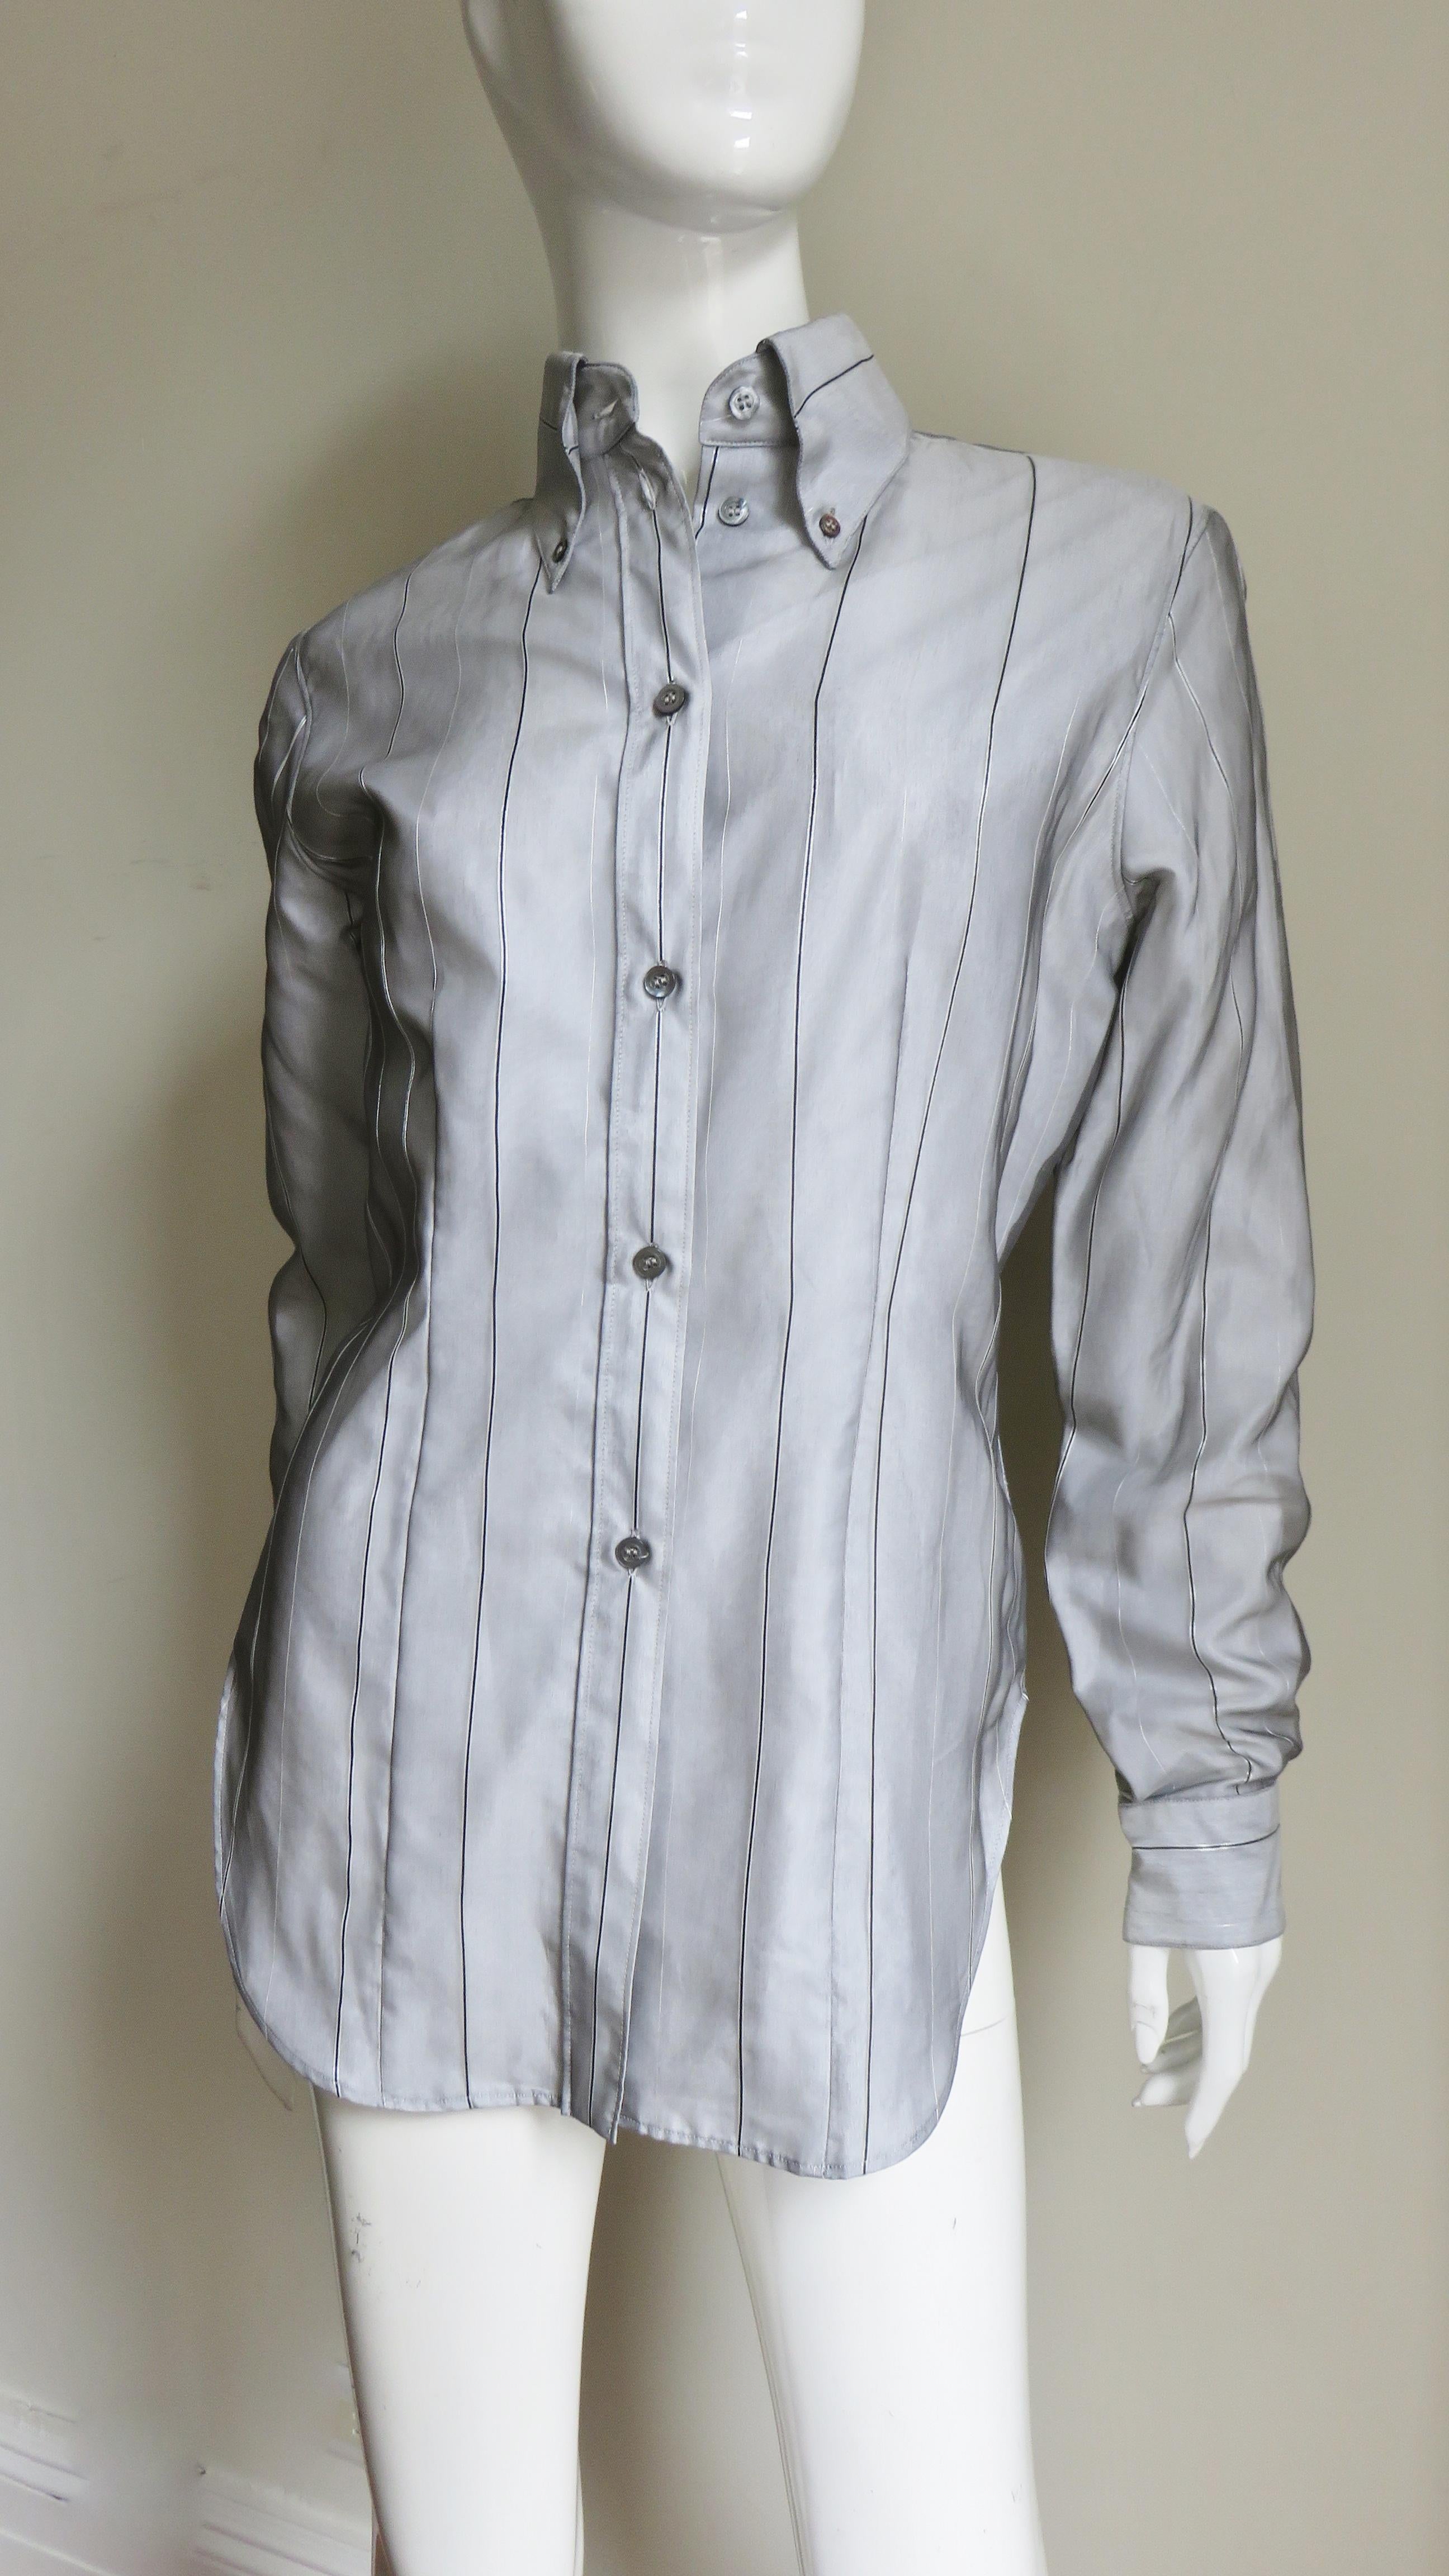 A fabulous 2 piece set by Alexander McQueen consisting of a long jacket and shirt in grey sheer silk with fine black and silver stripes over white.  The shirt has a grey mother of pearl button down collar, button front, long button cuffs sleeves